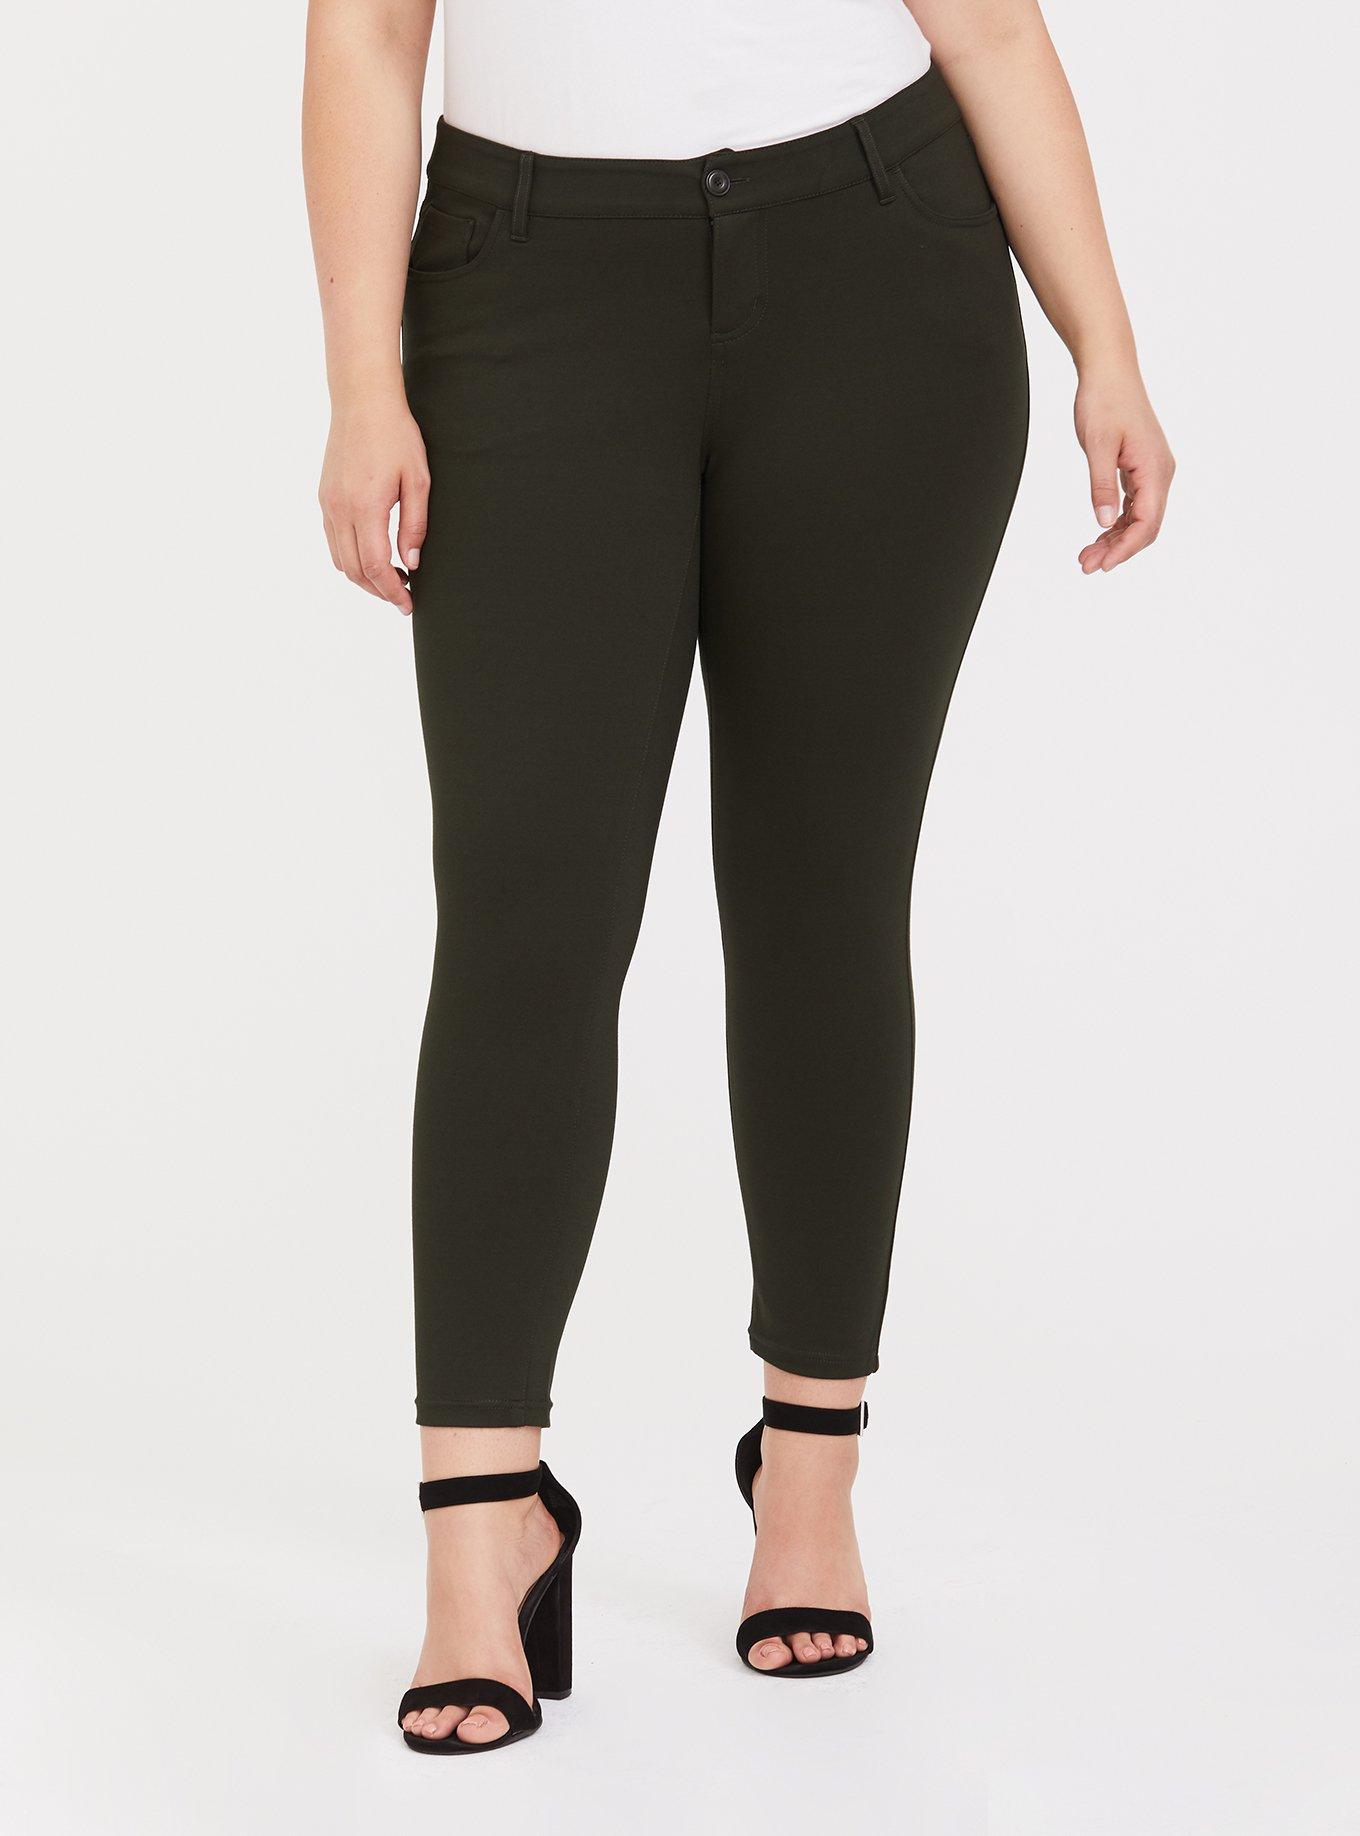 Plus Size - Ponte Stretch Ankle Skinny Pant - Forest Green - Torrid